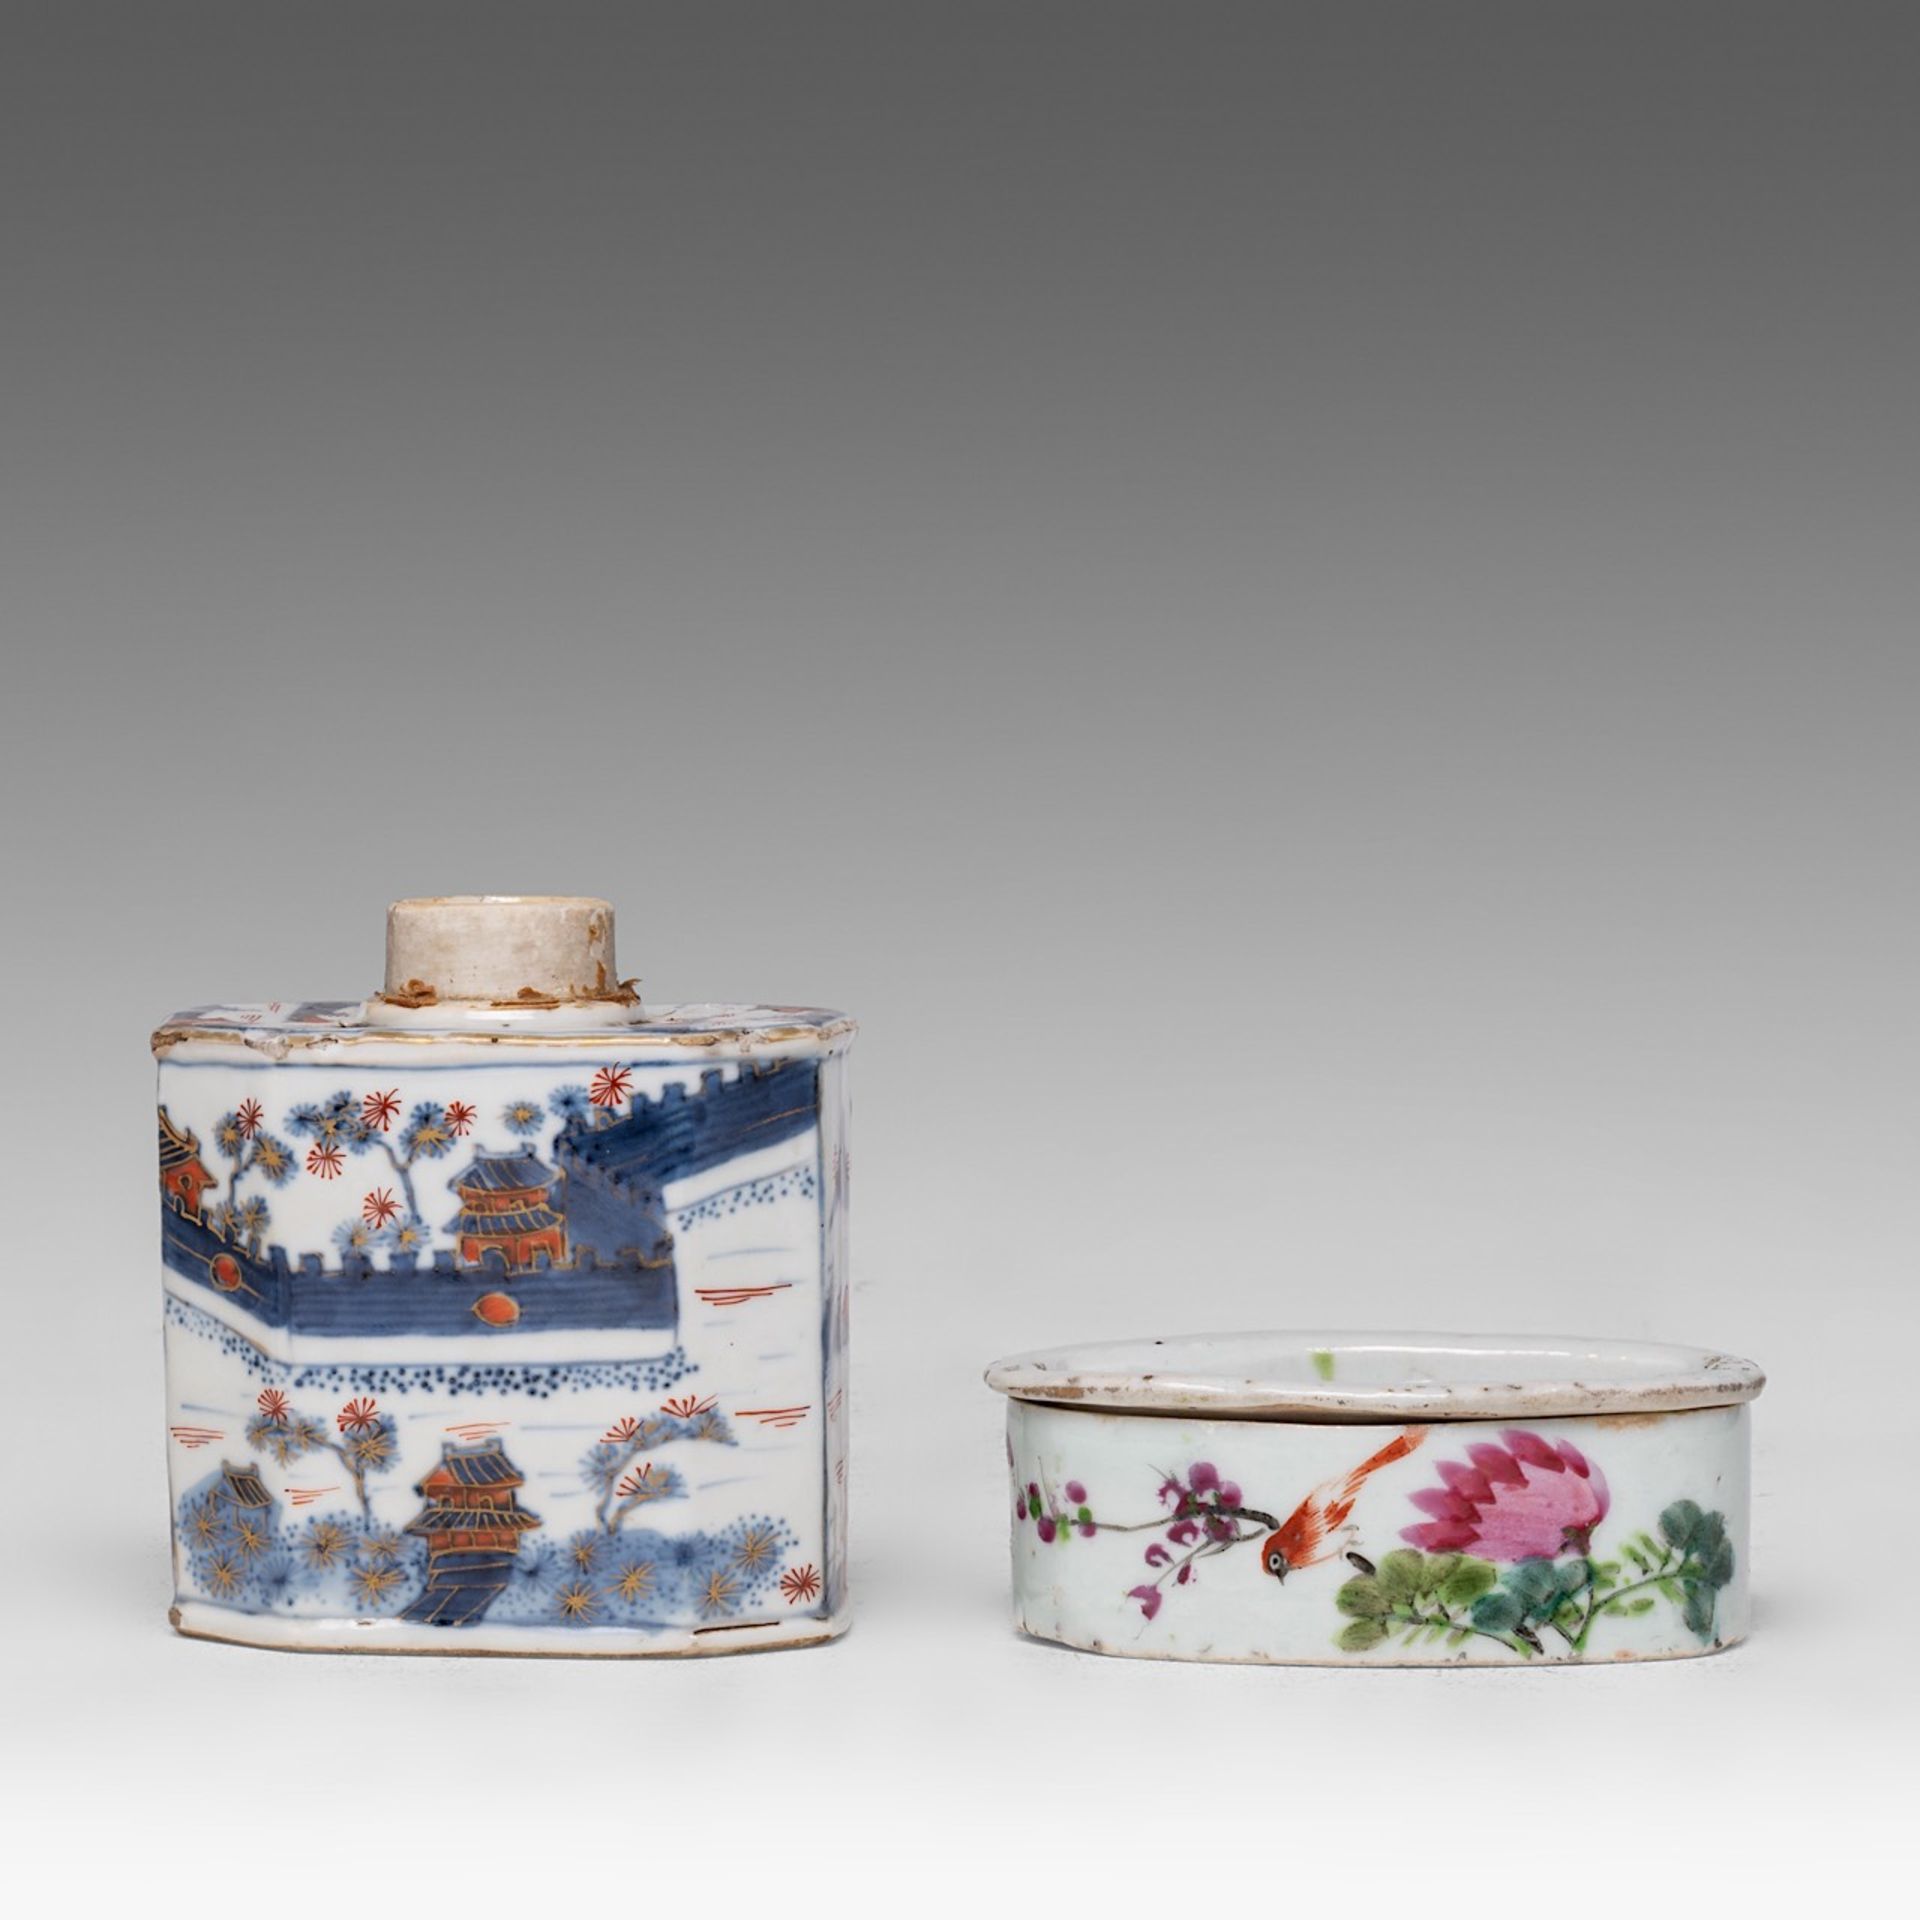 A collection of four Chinese scholar's objects, incl. a brush pot with inscriptions, late 18thC - ad - Image 19 of 29